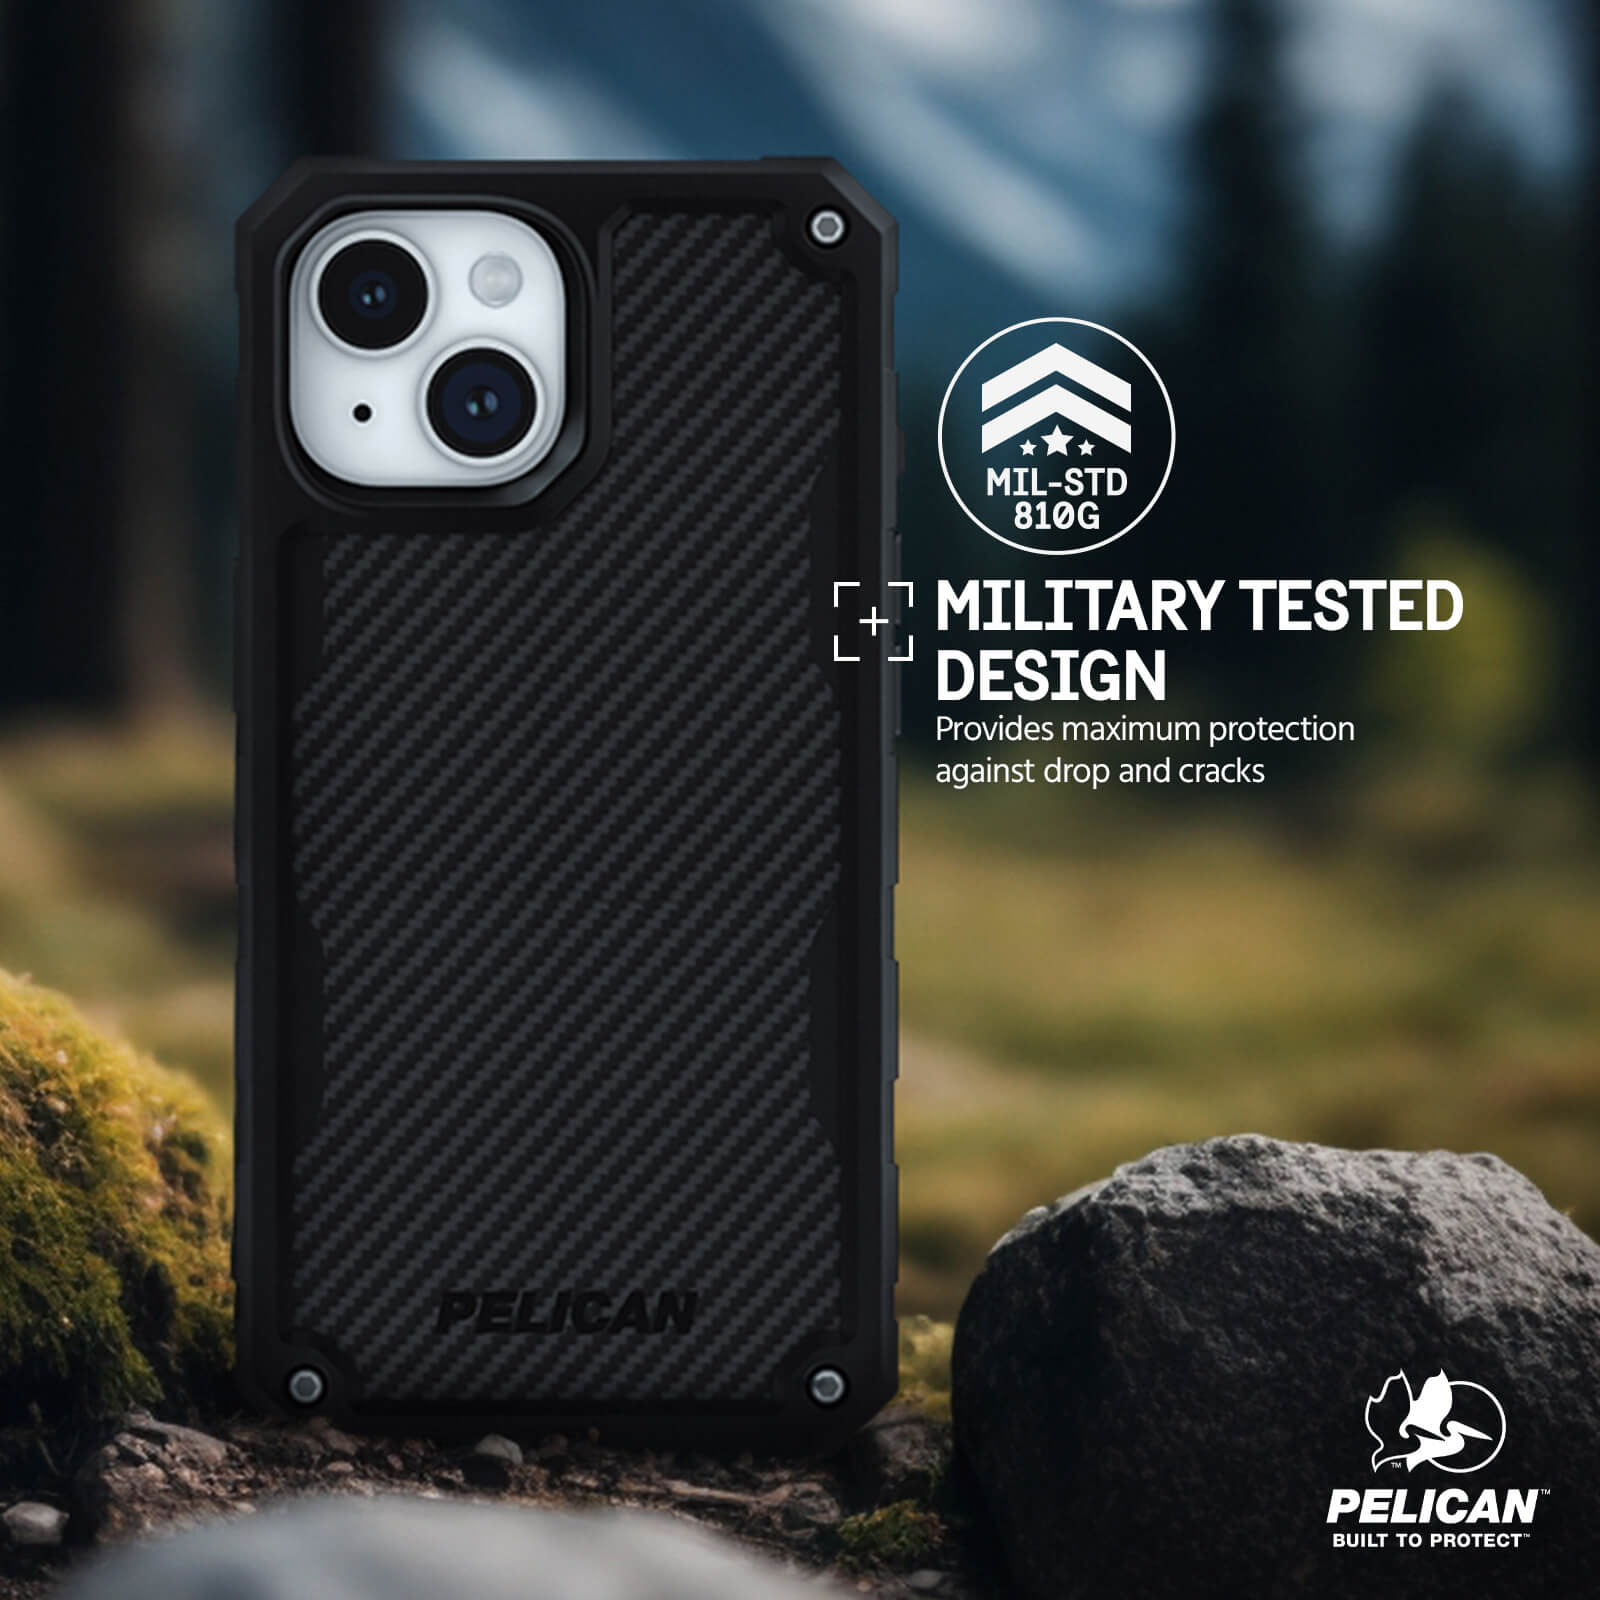 MILITARY TESTED DESIGN. PROVIDES MAXIMUM PROTECTION AGAINST DROP AND CRACKS.